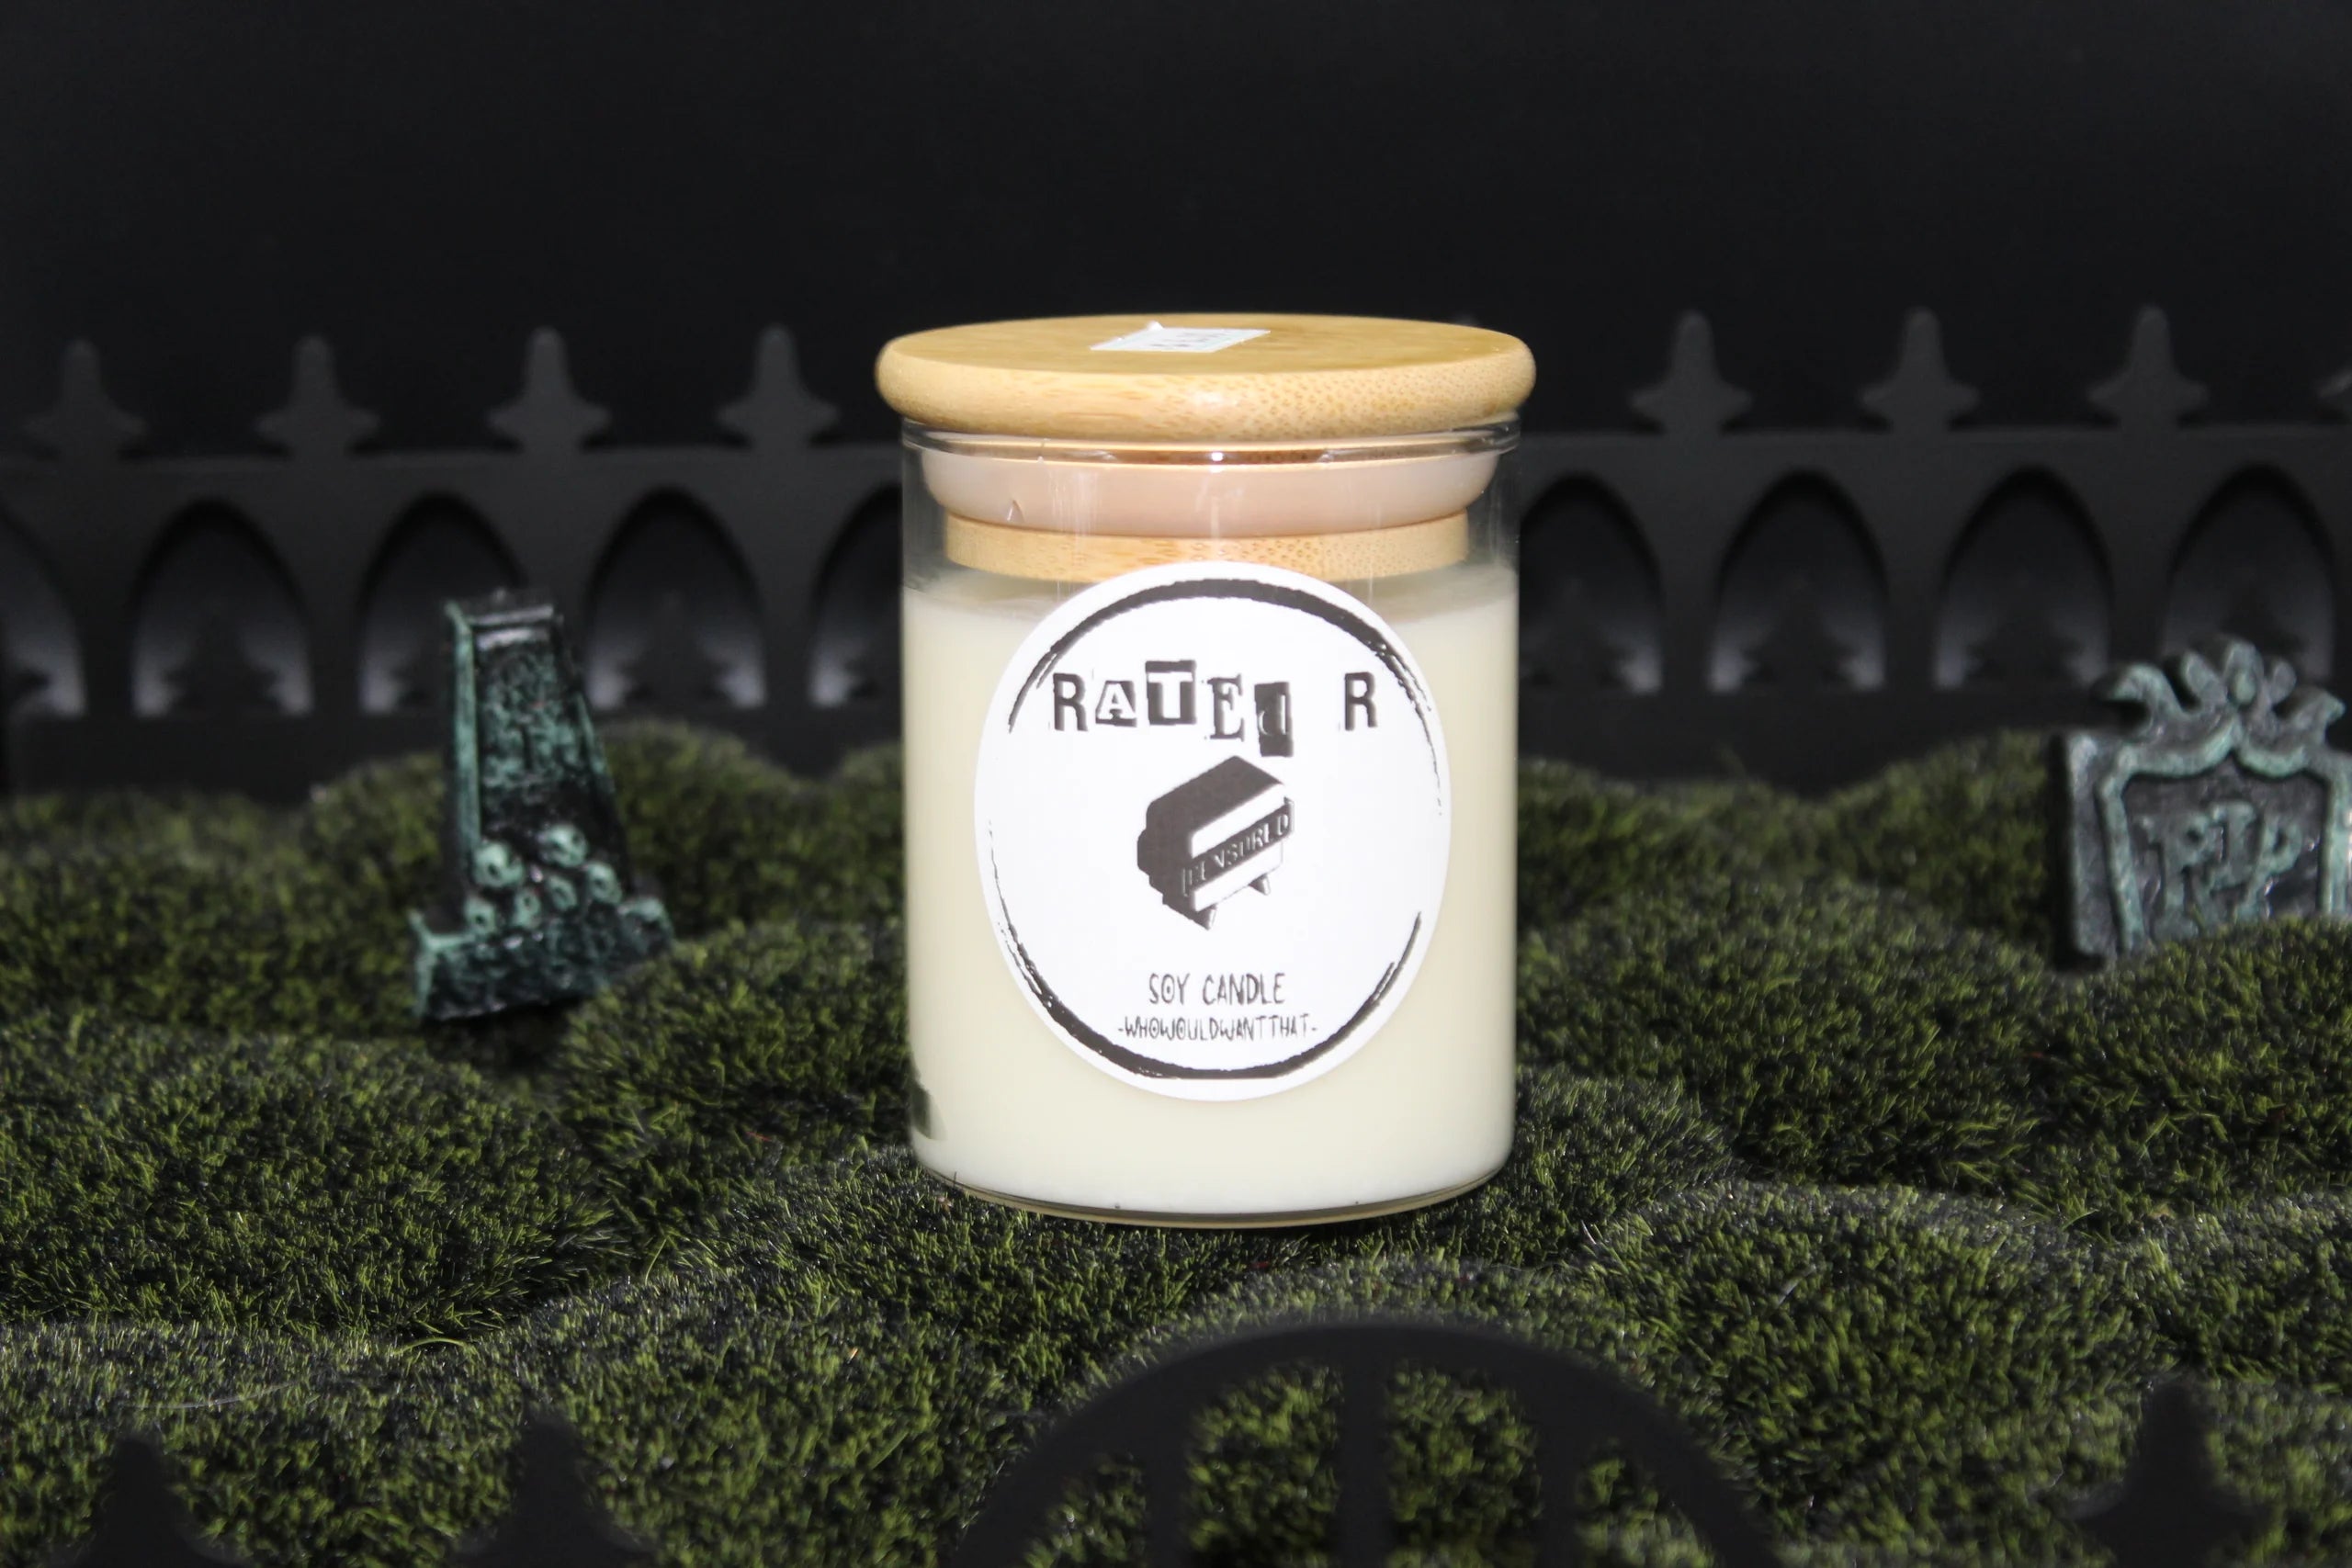 Rated R Candle - 8 oz Scented Soy Candle - Who Would Want That